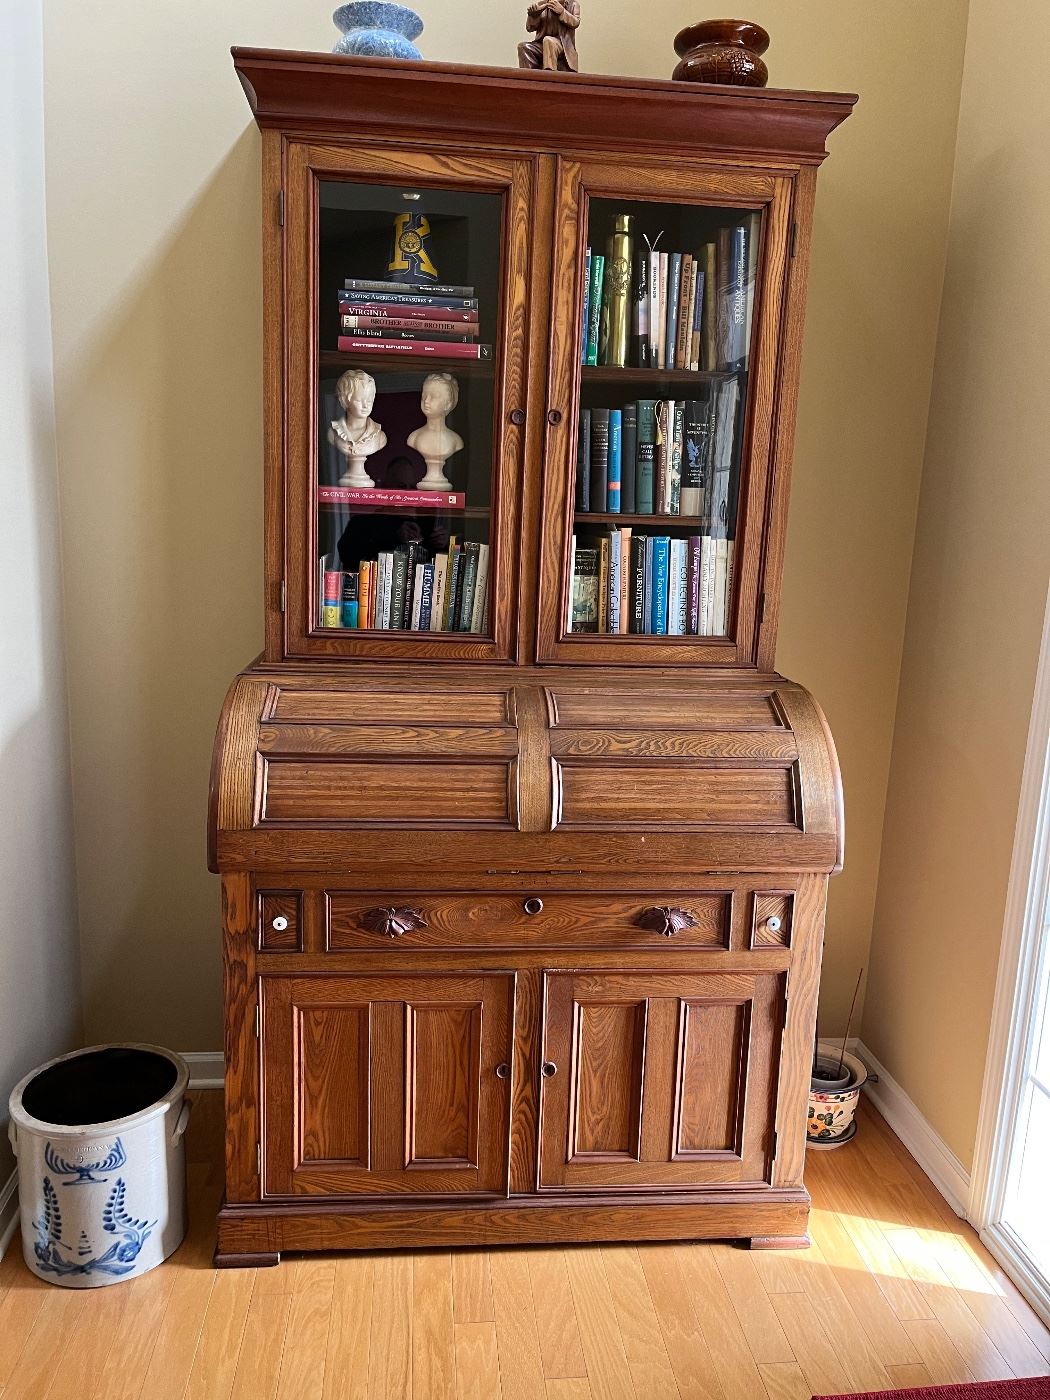 Absolutely stunning turn of the century secretary with a barrel style fold down leather top desk, crock, books, busts, pottery